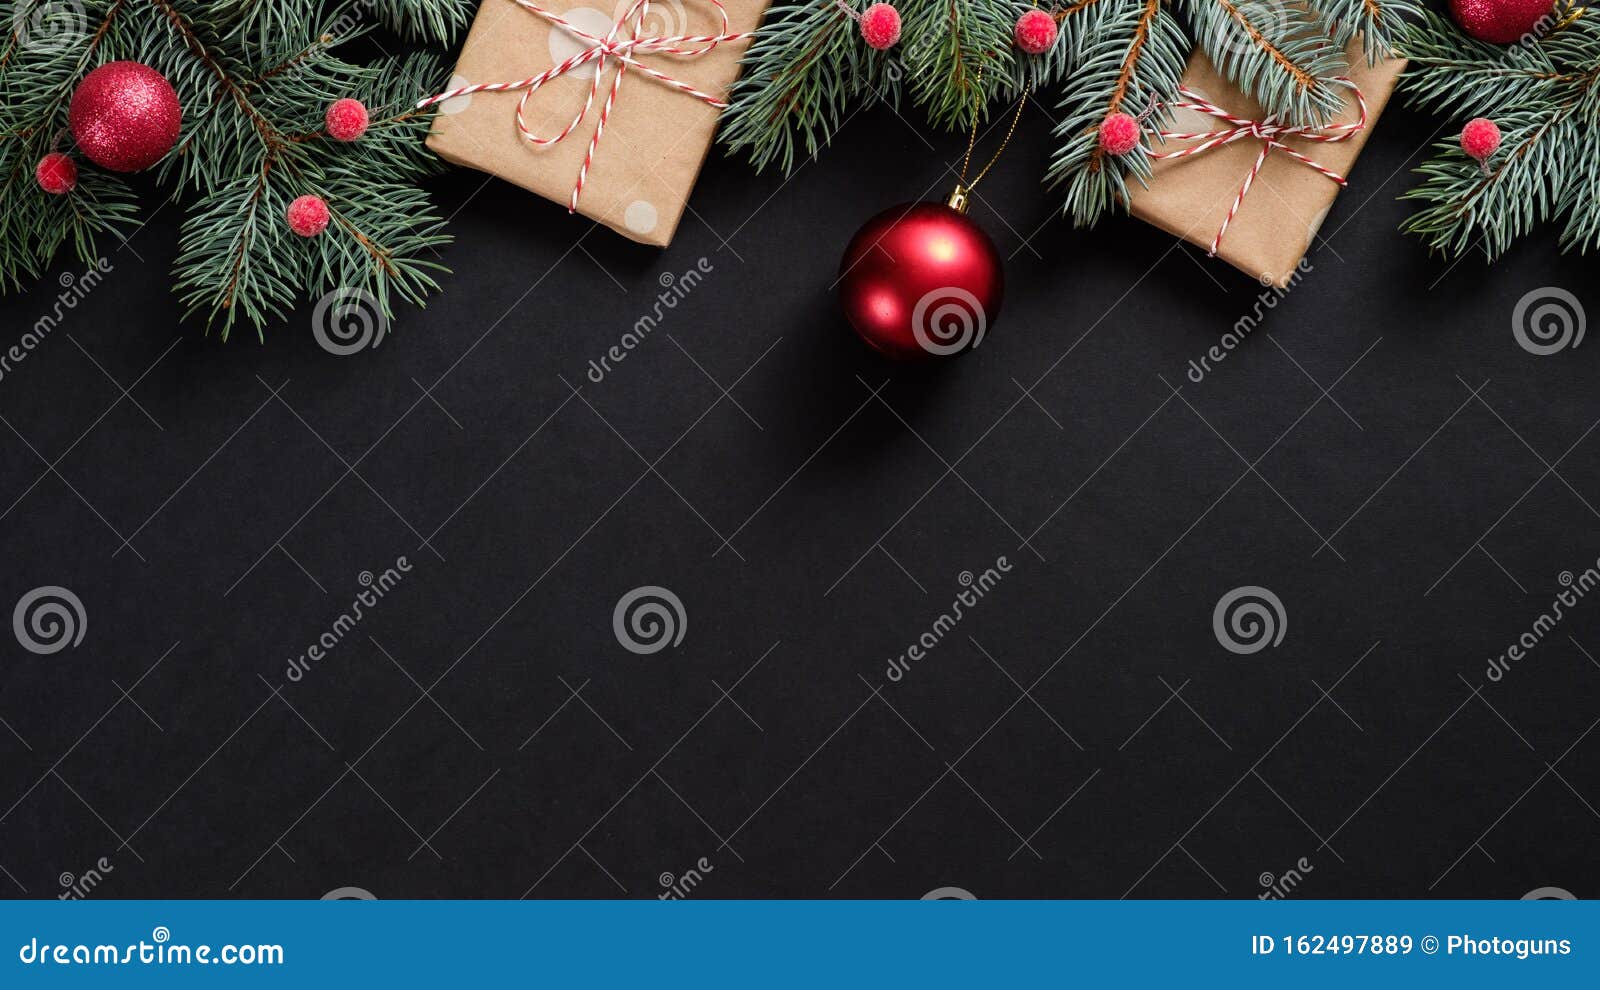 christmas tree with red decorations and gifts on black background. flat lay, top view, overhead. christmas banner mockup